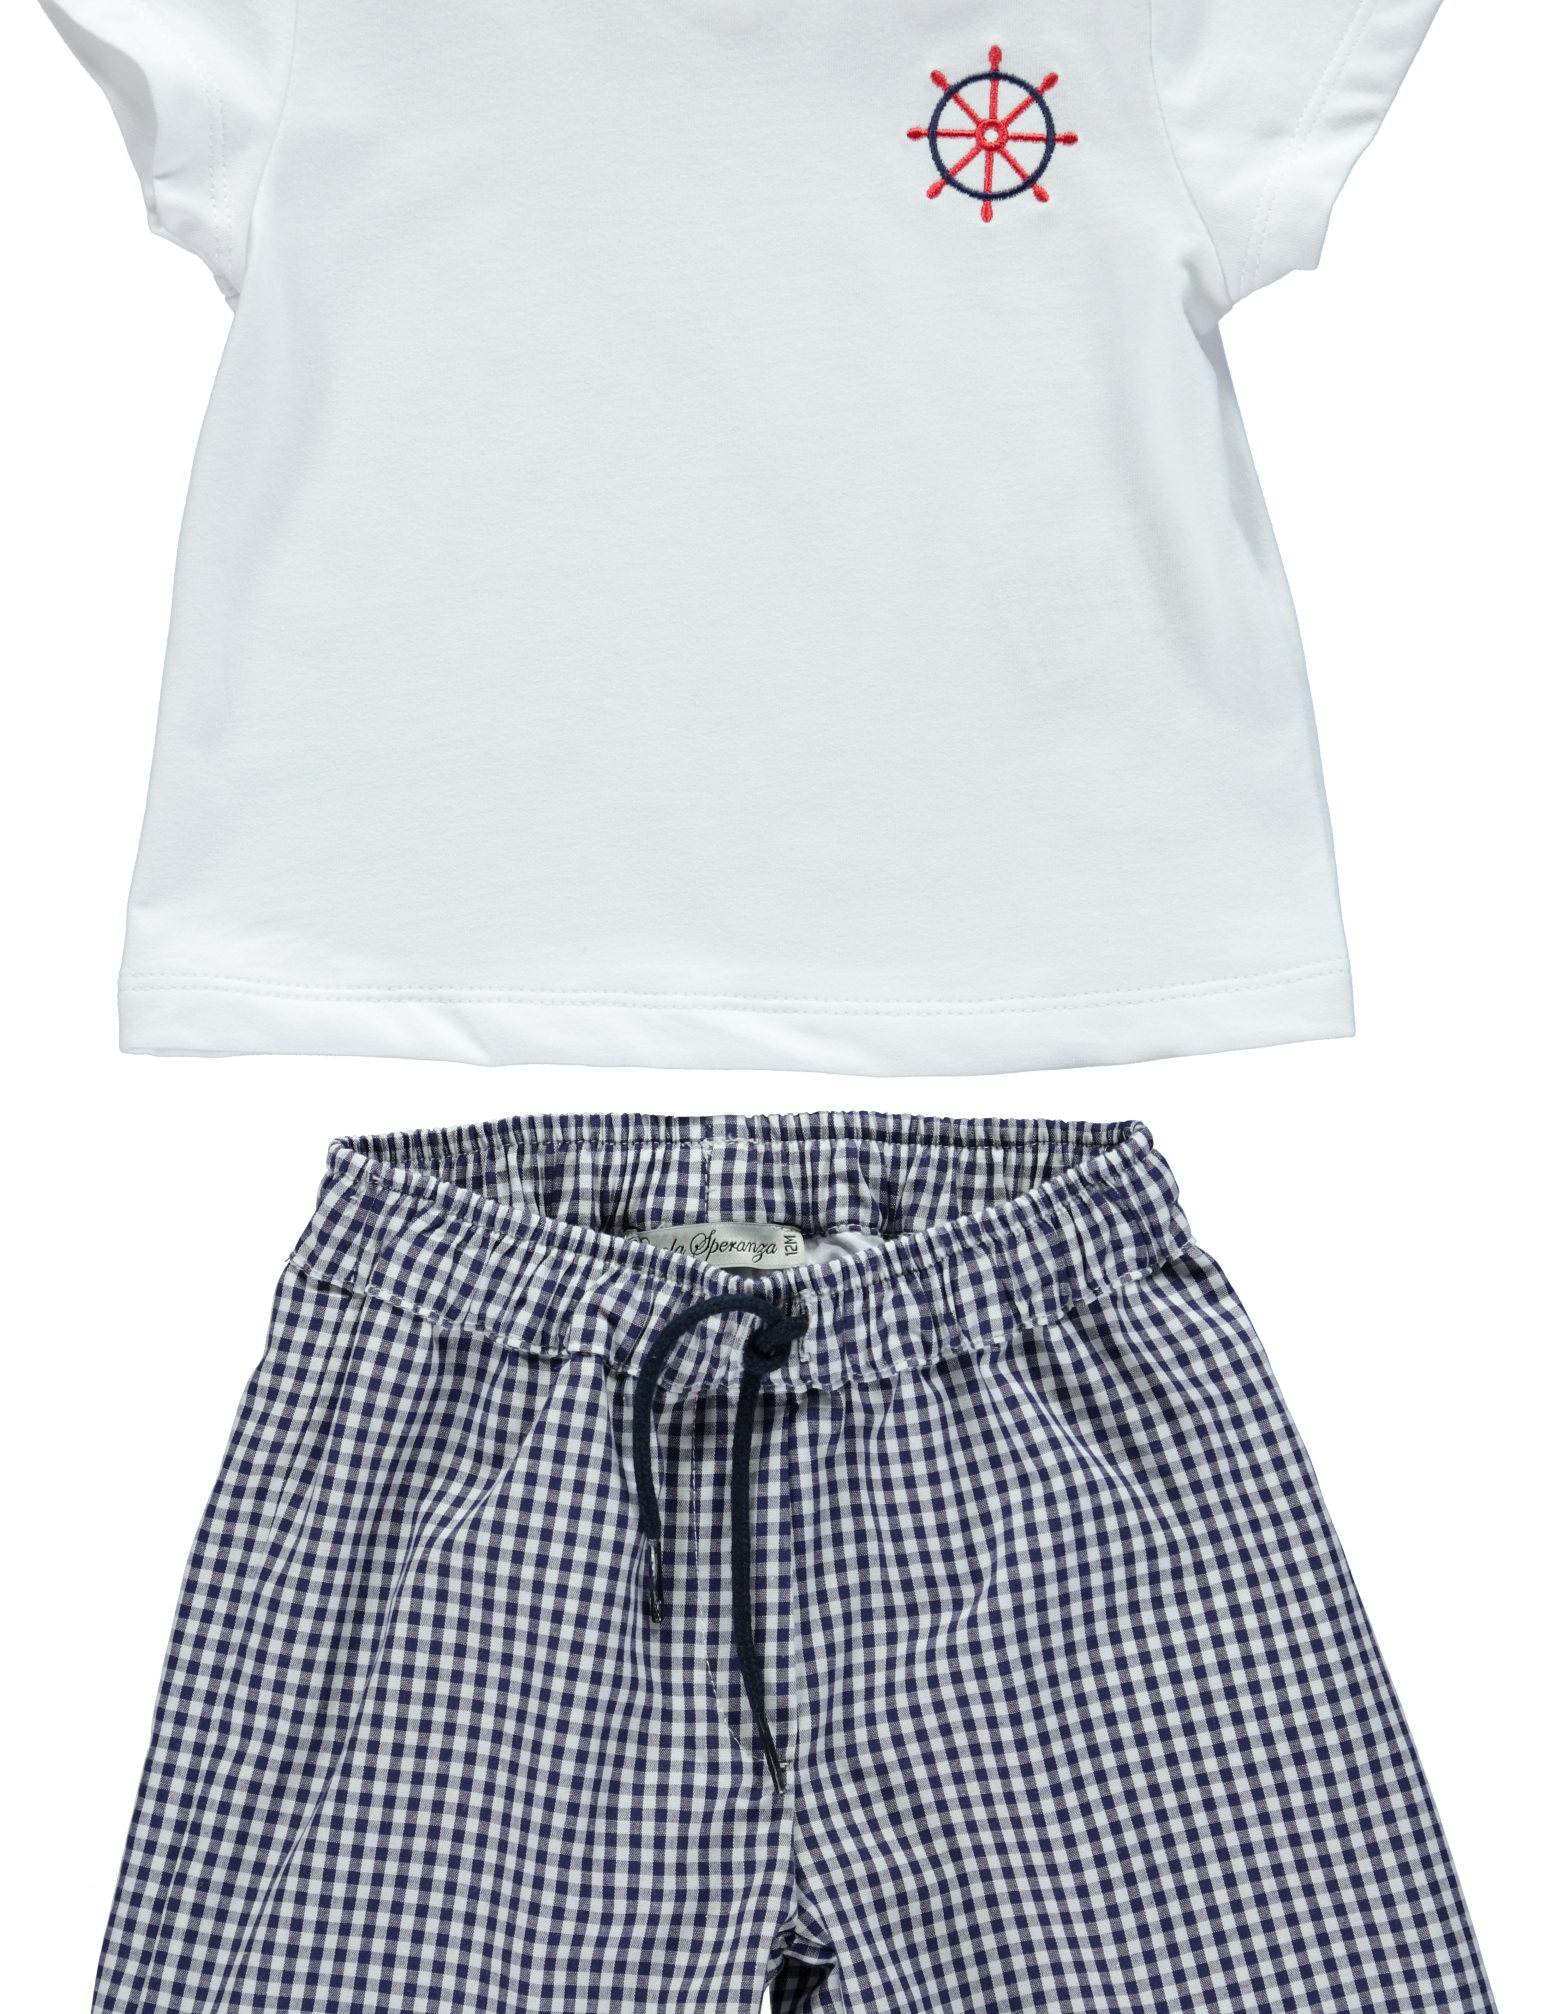 Piccola Speranza Baby Boy Organic 2-Piece Set With White T-Shirt And Chess Navy Shorts for 1Y - 3Y - CapuletKids